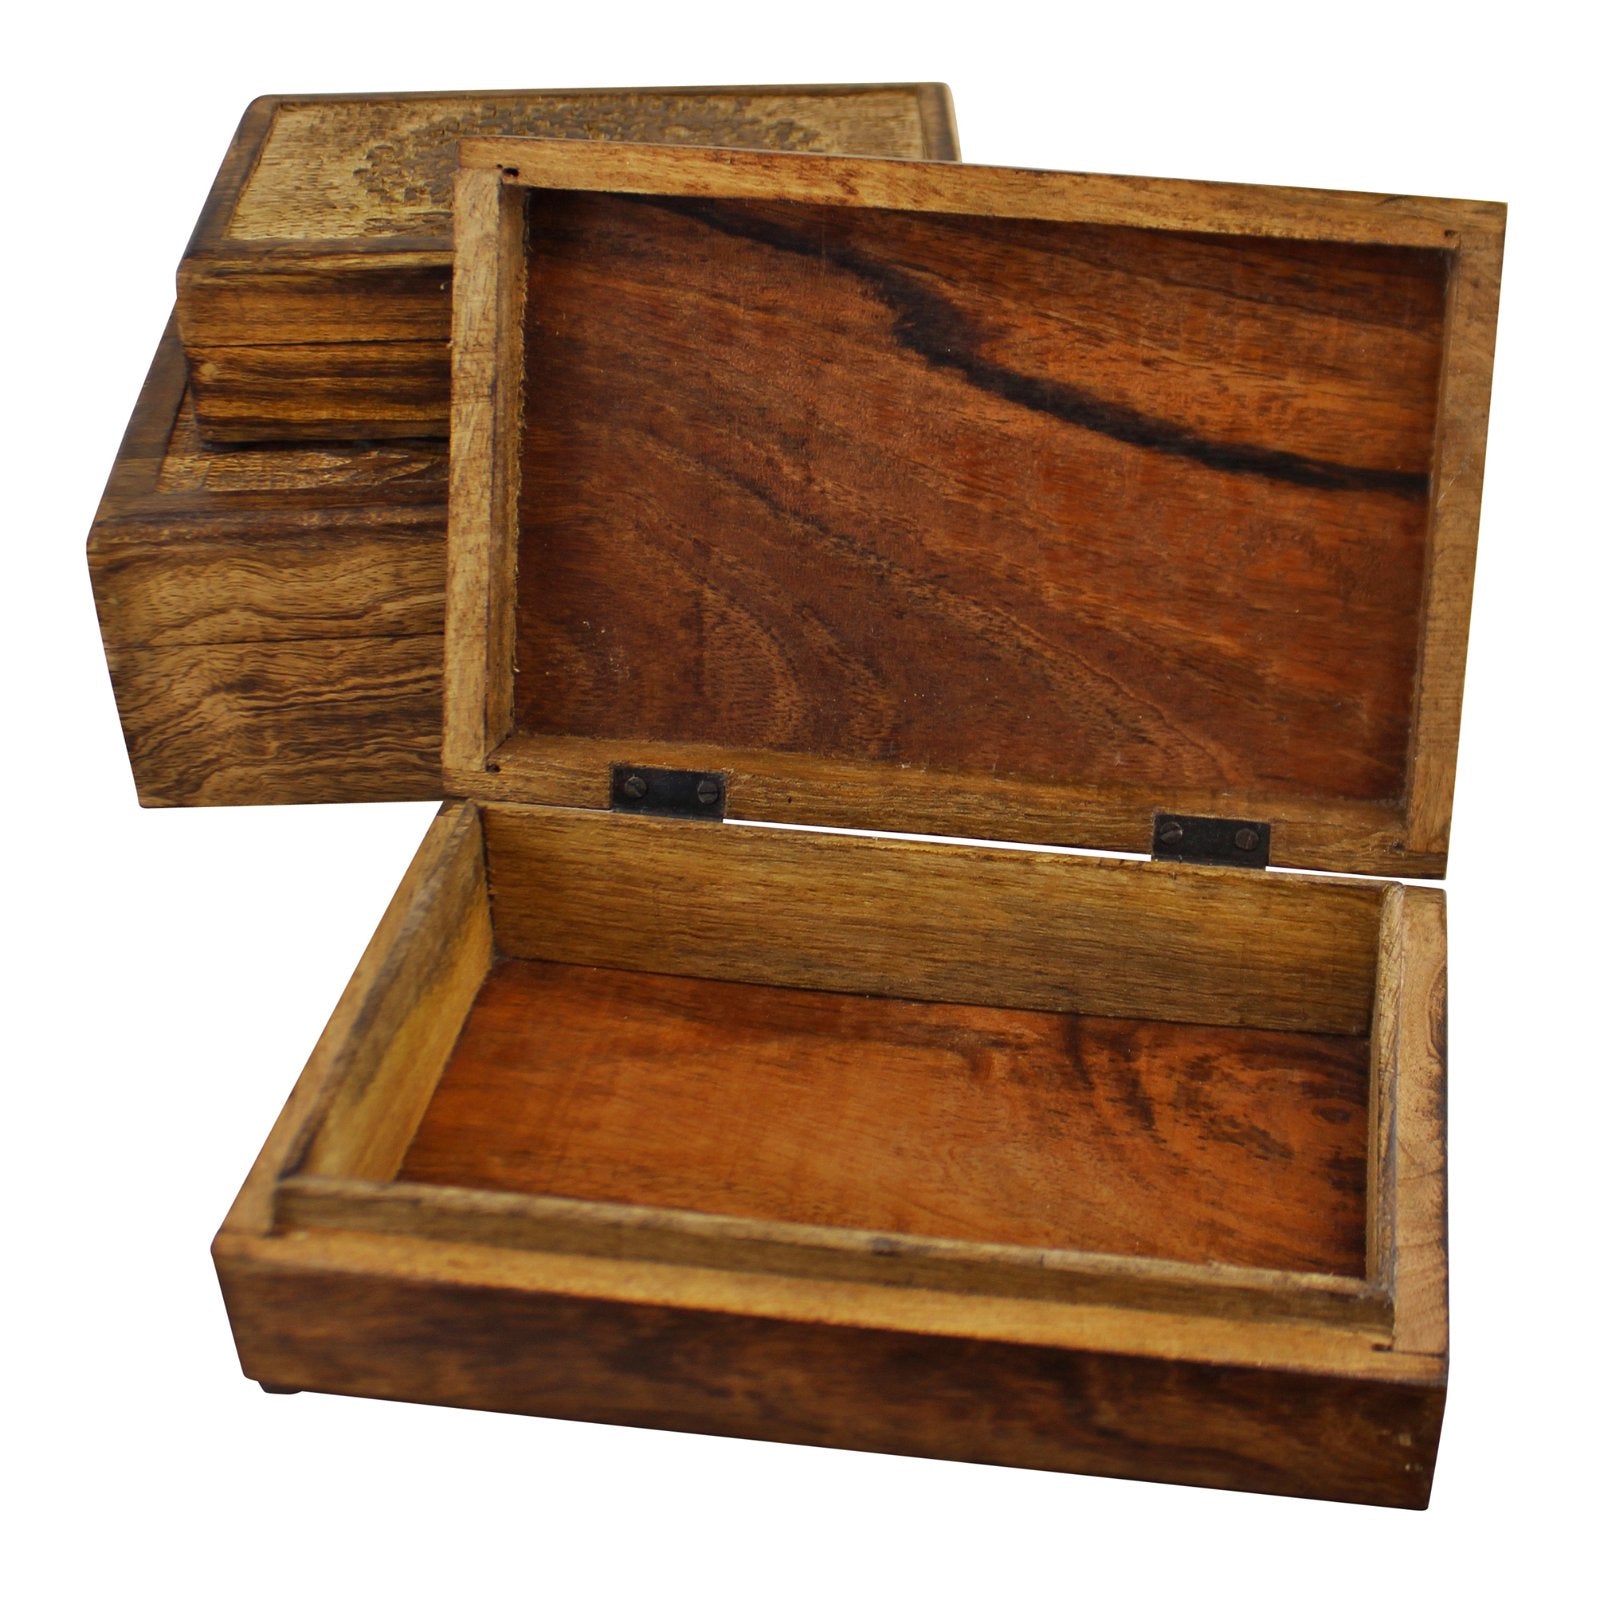 View Set Of 3 Tree Of Life Wooden Boxes information